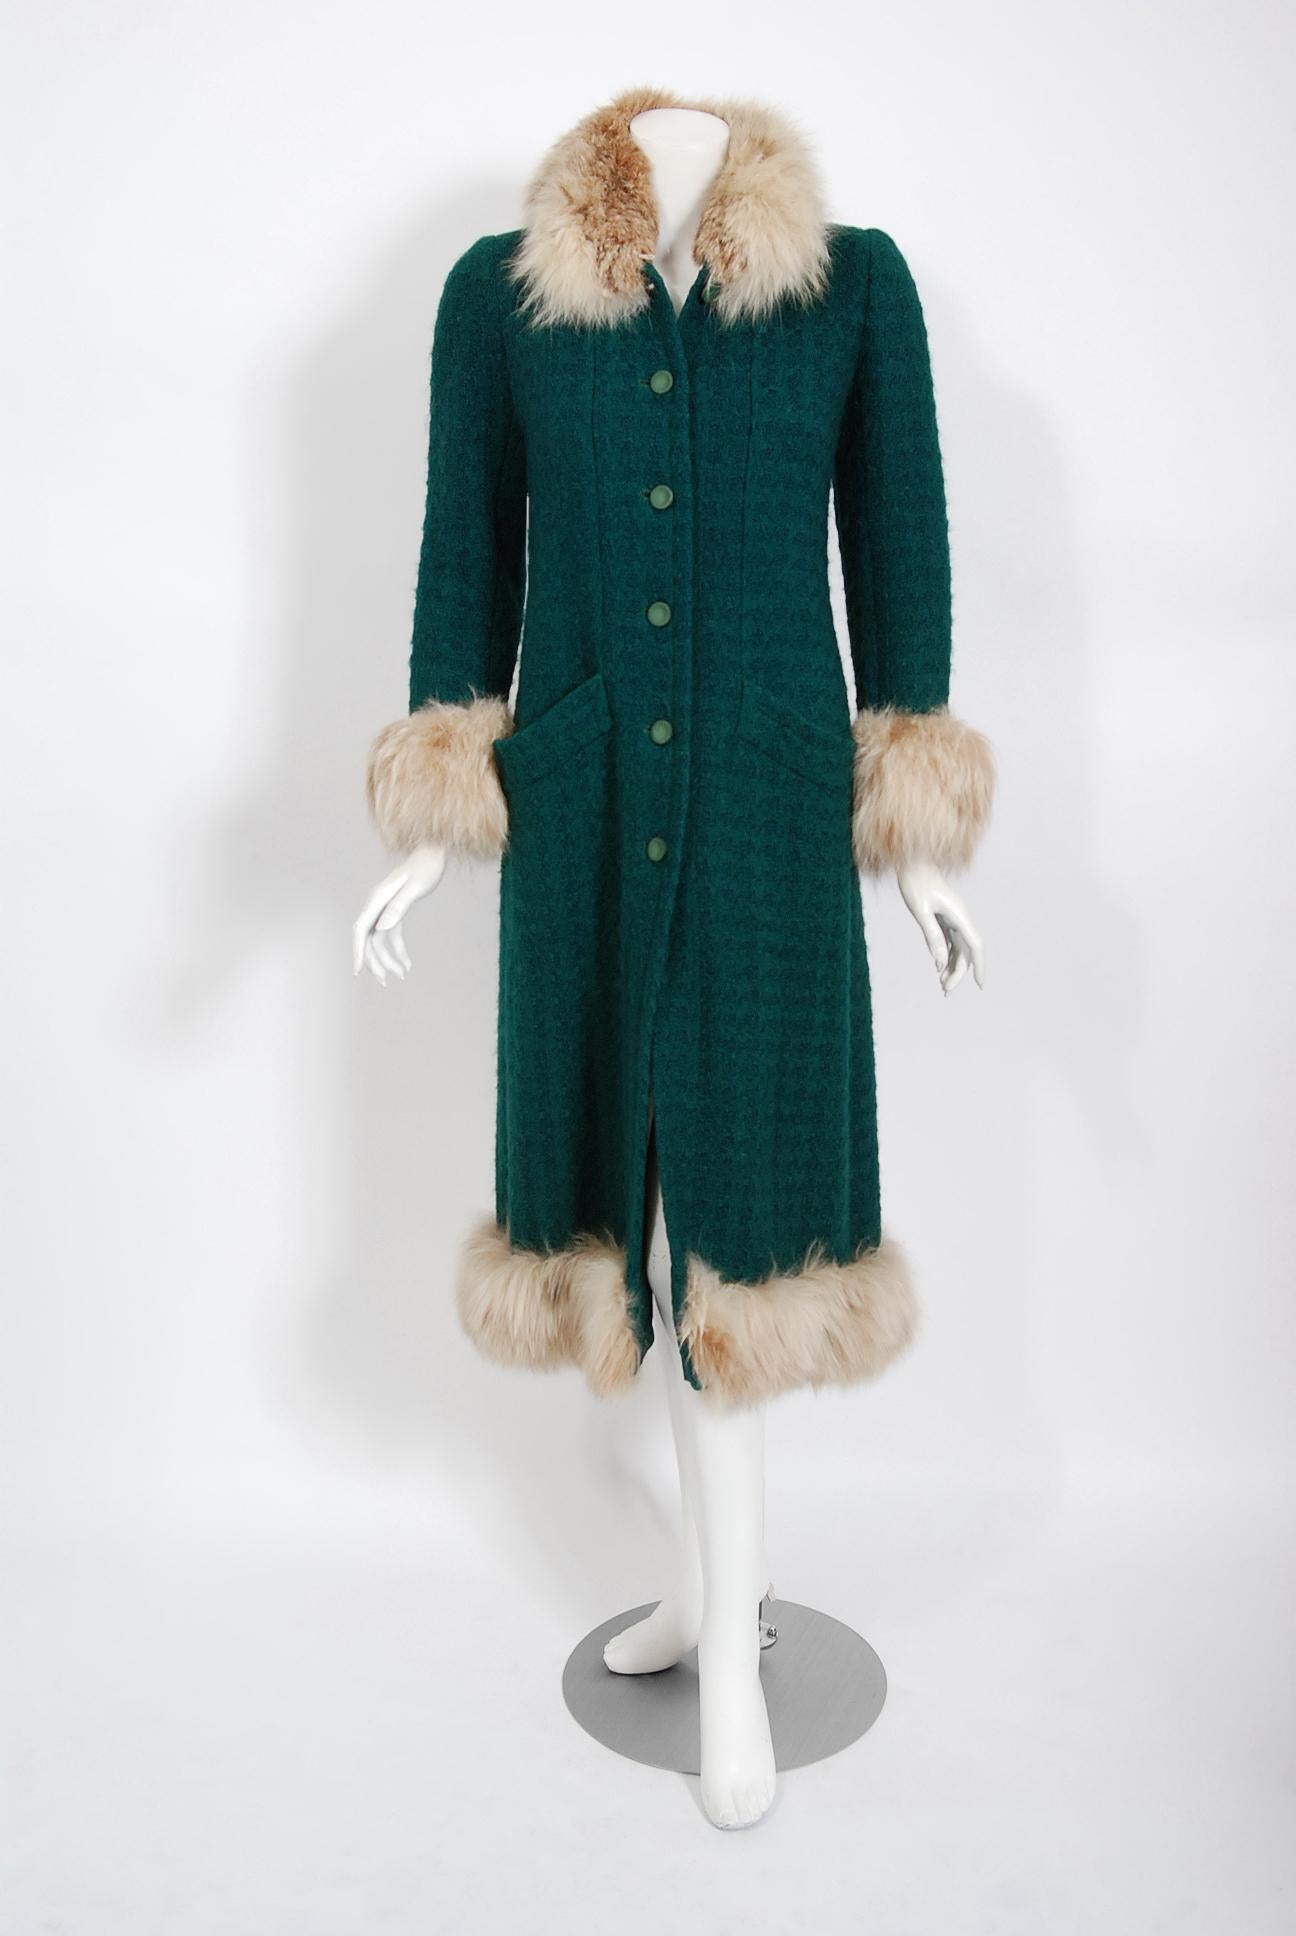 Vintage 1974 Chanel Haute-Couture Forest Green Boucle Wool & Fox-Fur Jacket Coat 4